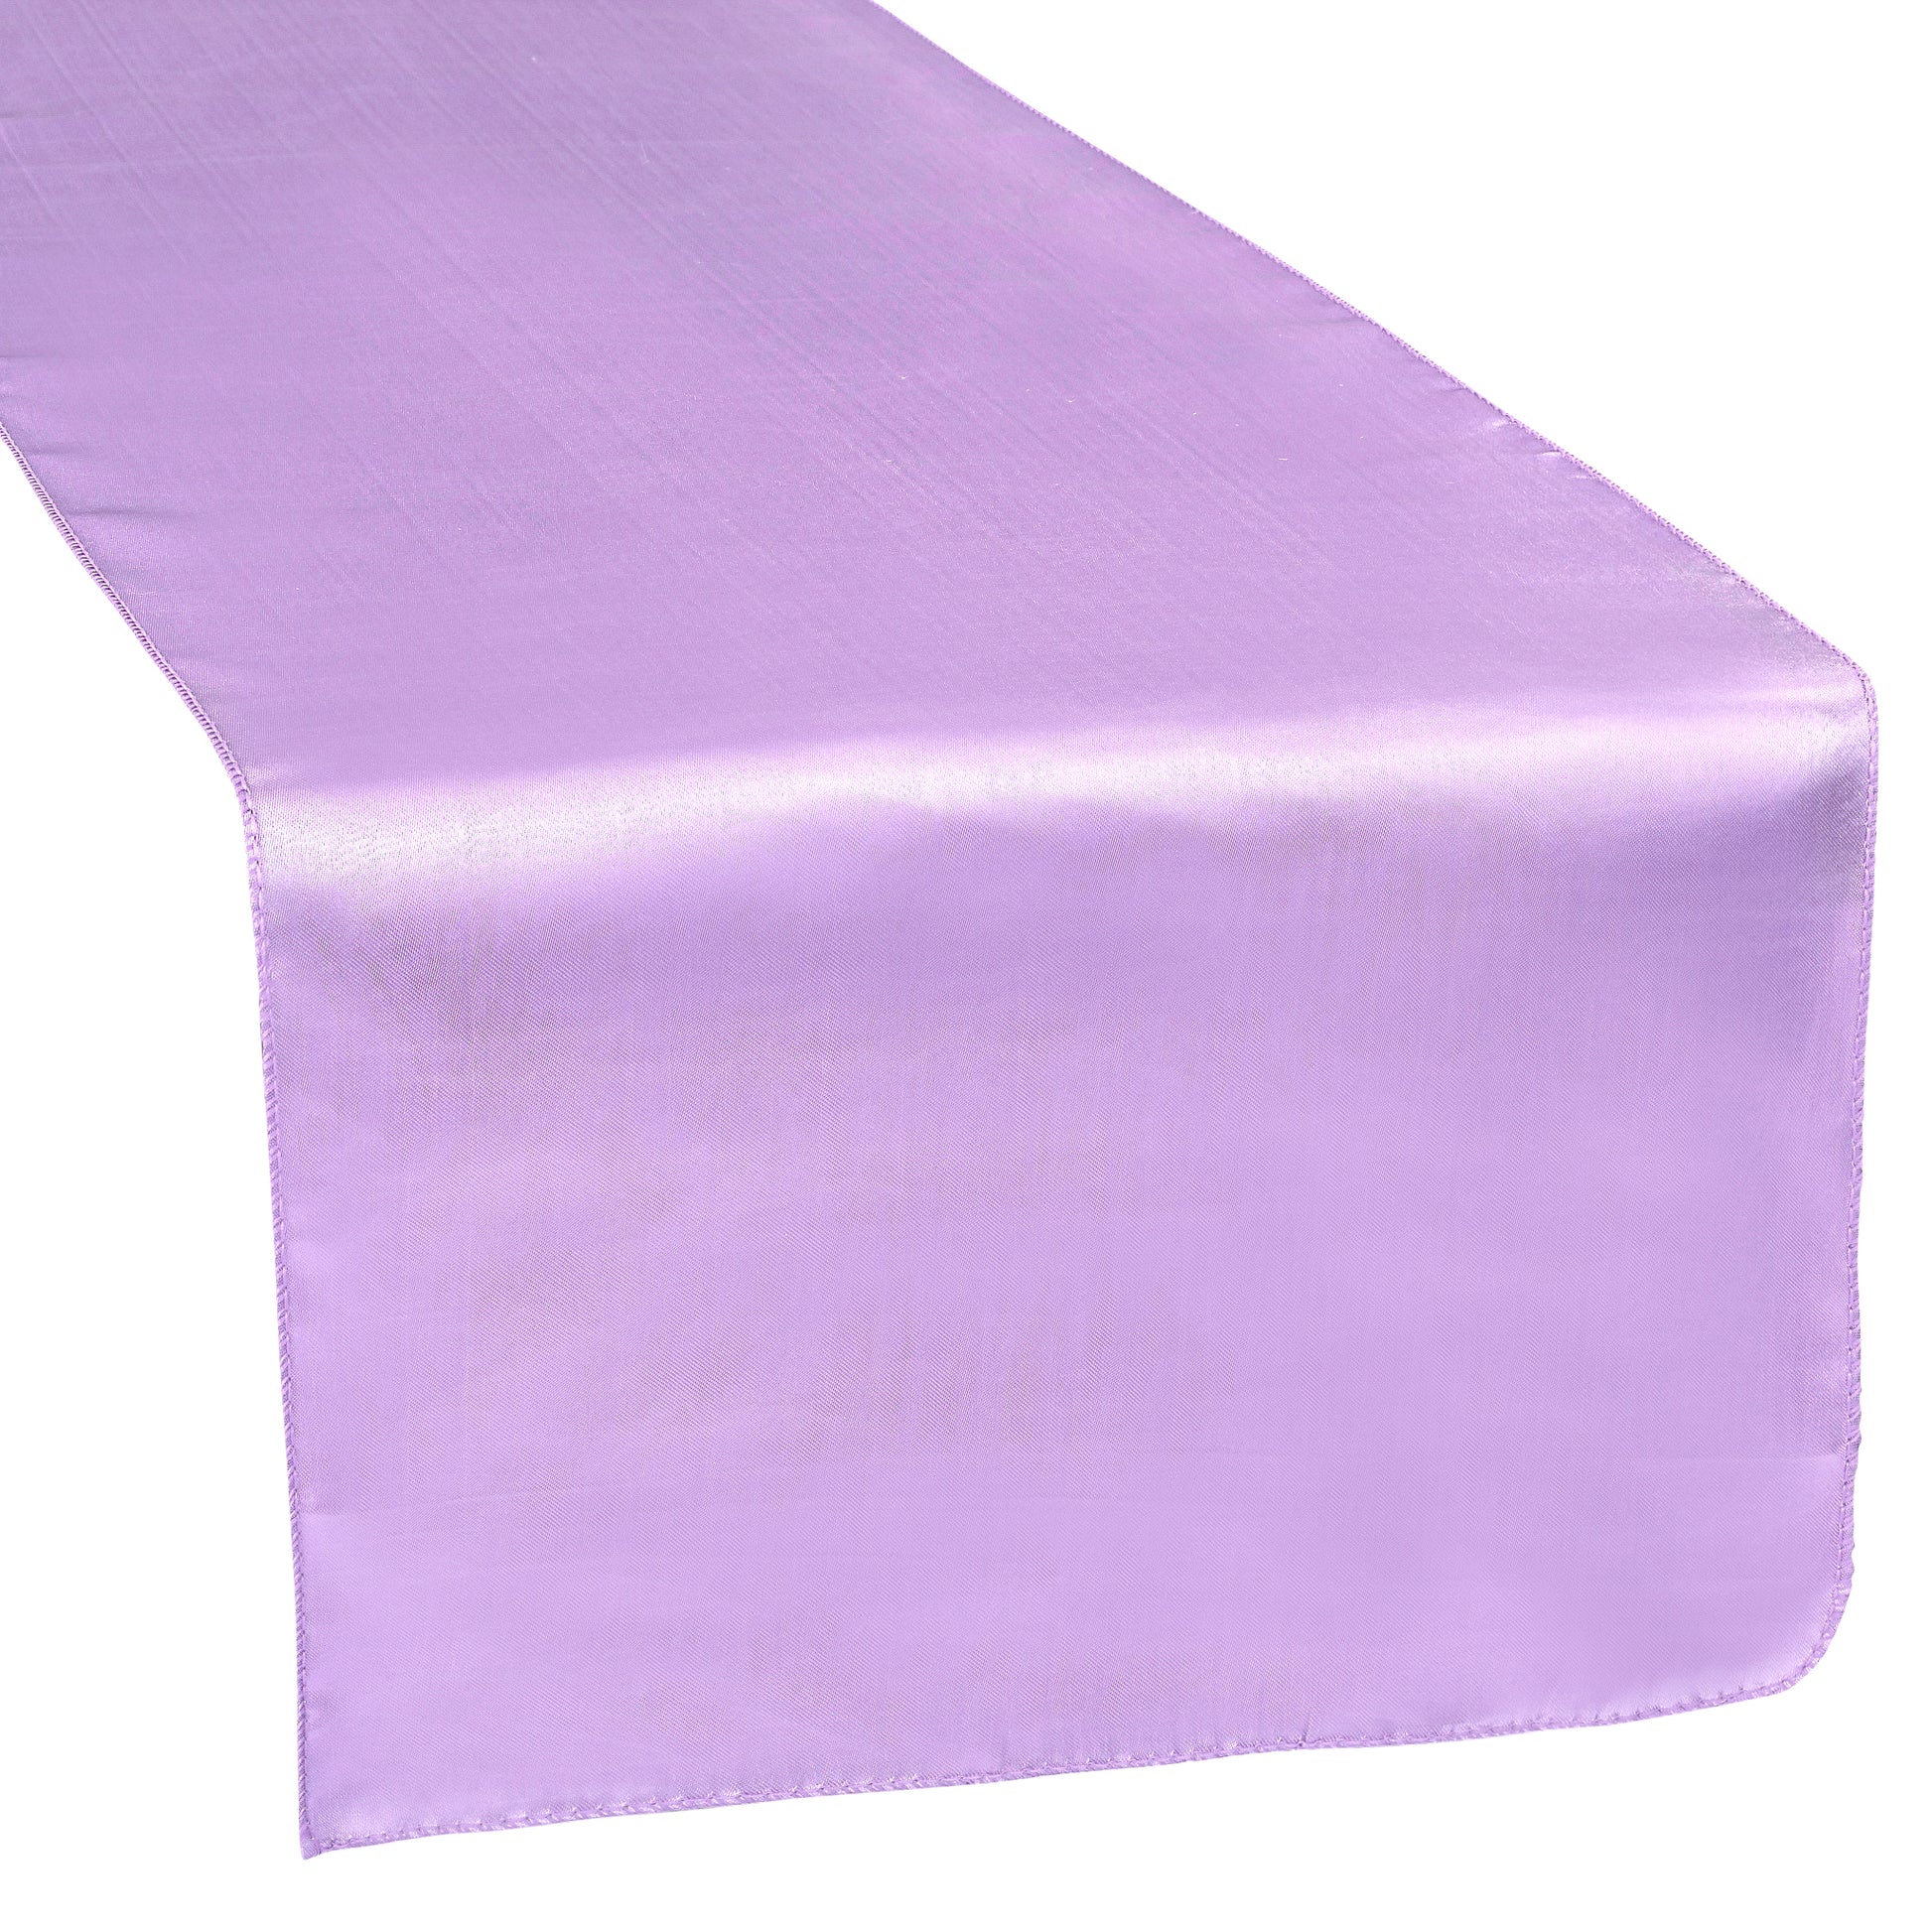 Satin Table Runner - Victorian Lilac/Wisteria